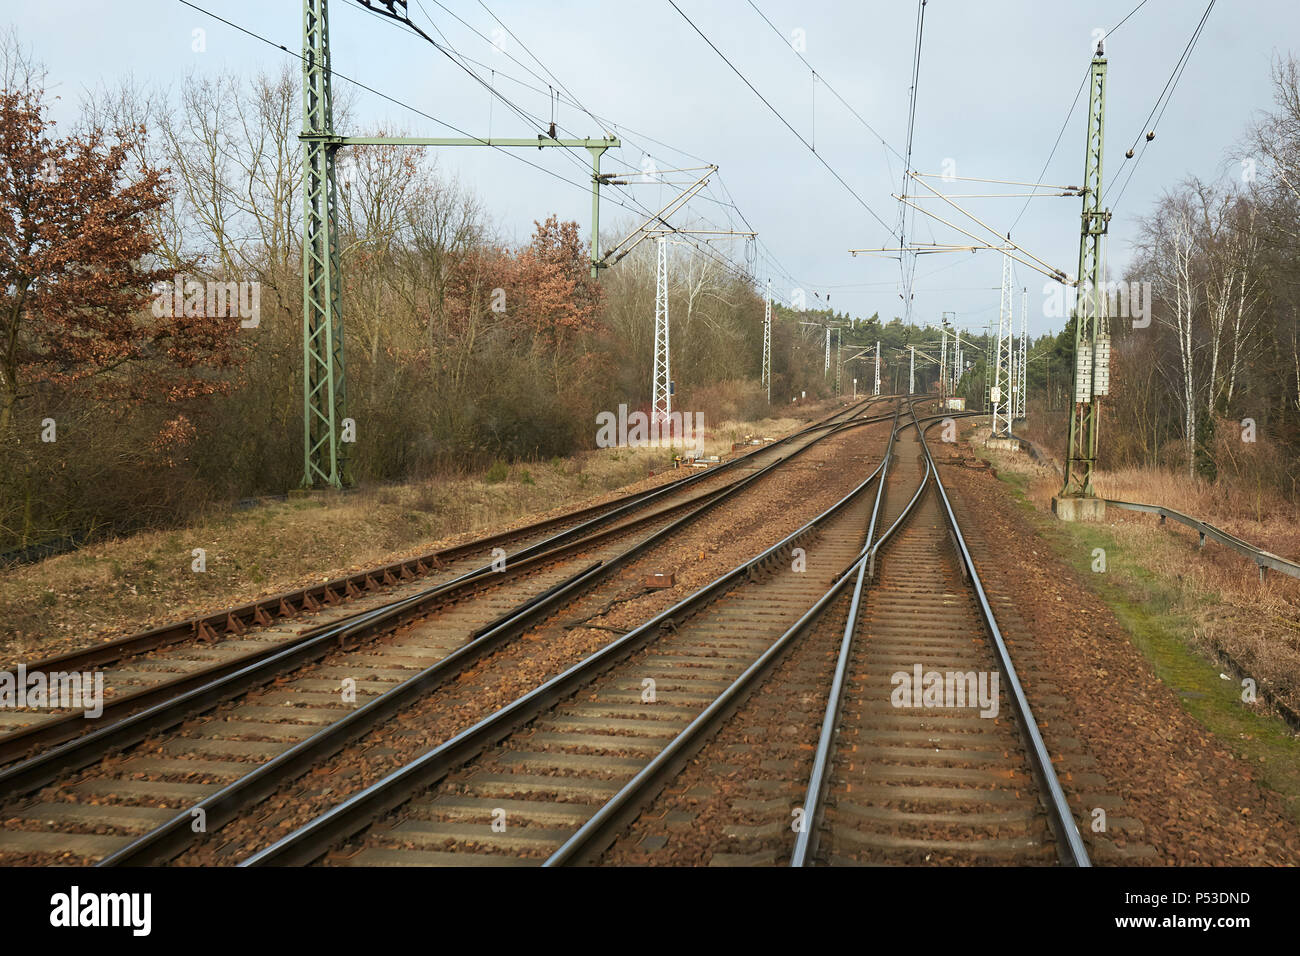 Berlin, Germany - View of multi-track railway tracks from a moving train in Berlin-Wuhlheide. Stock Photo